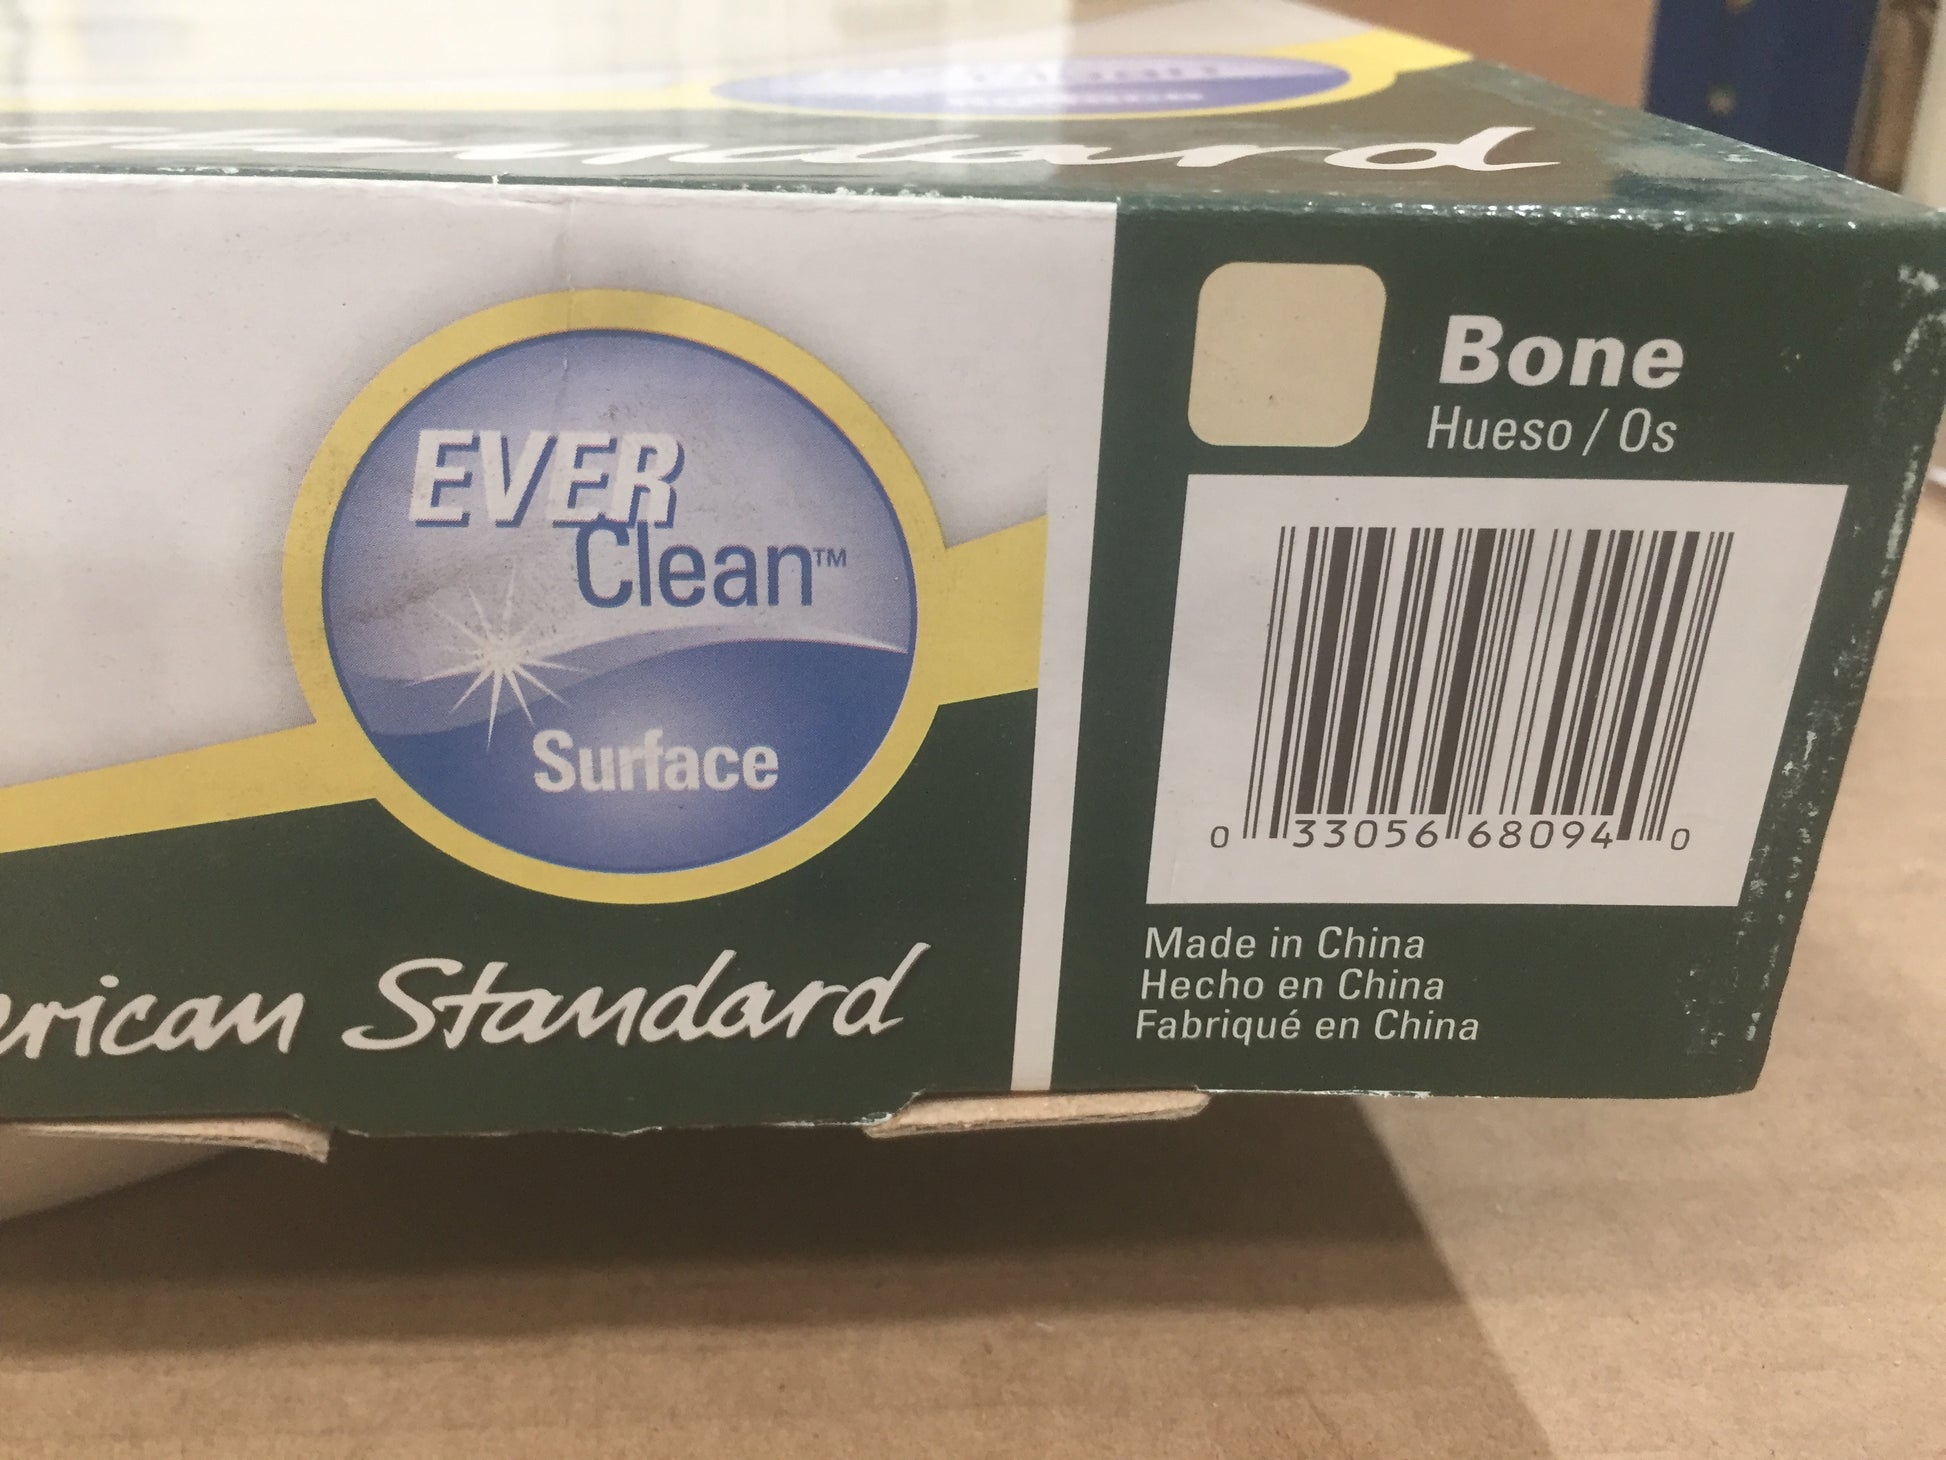 EVERCLEAN BONE PLASTIC ELONGATED CLOSED FRONT WITH COVER